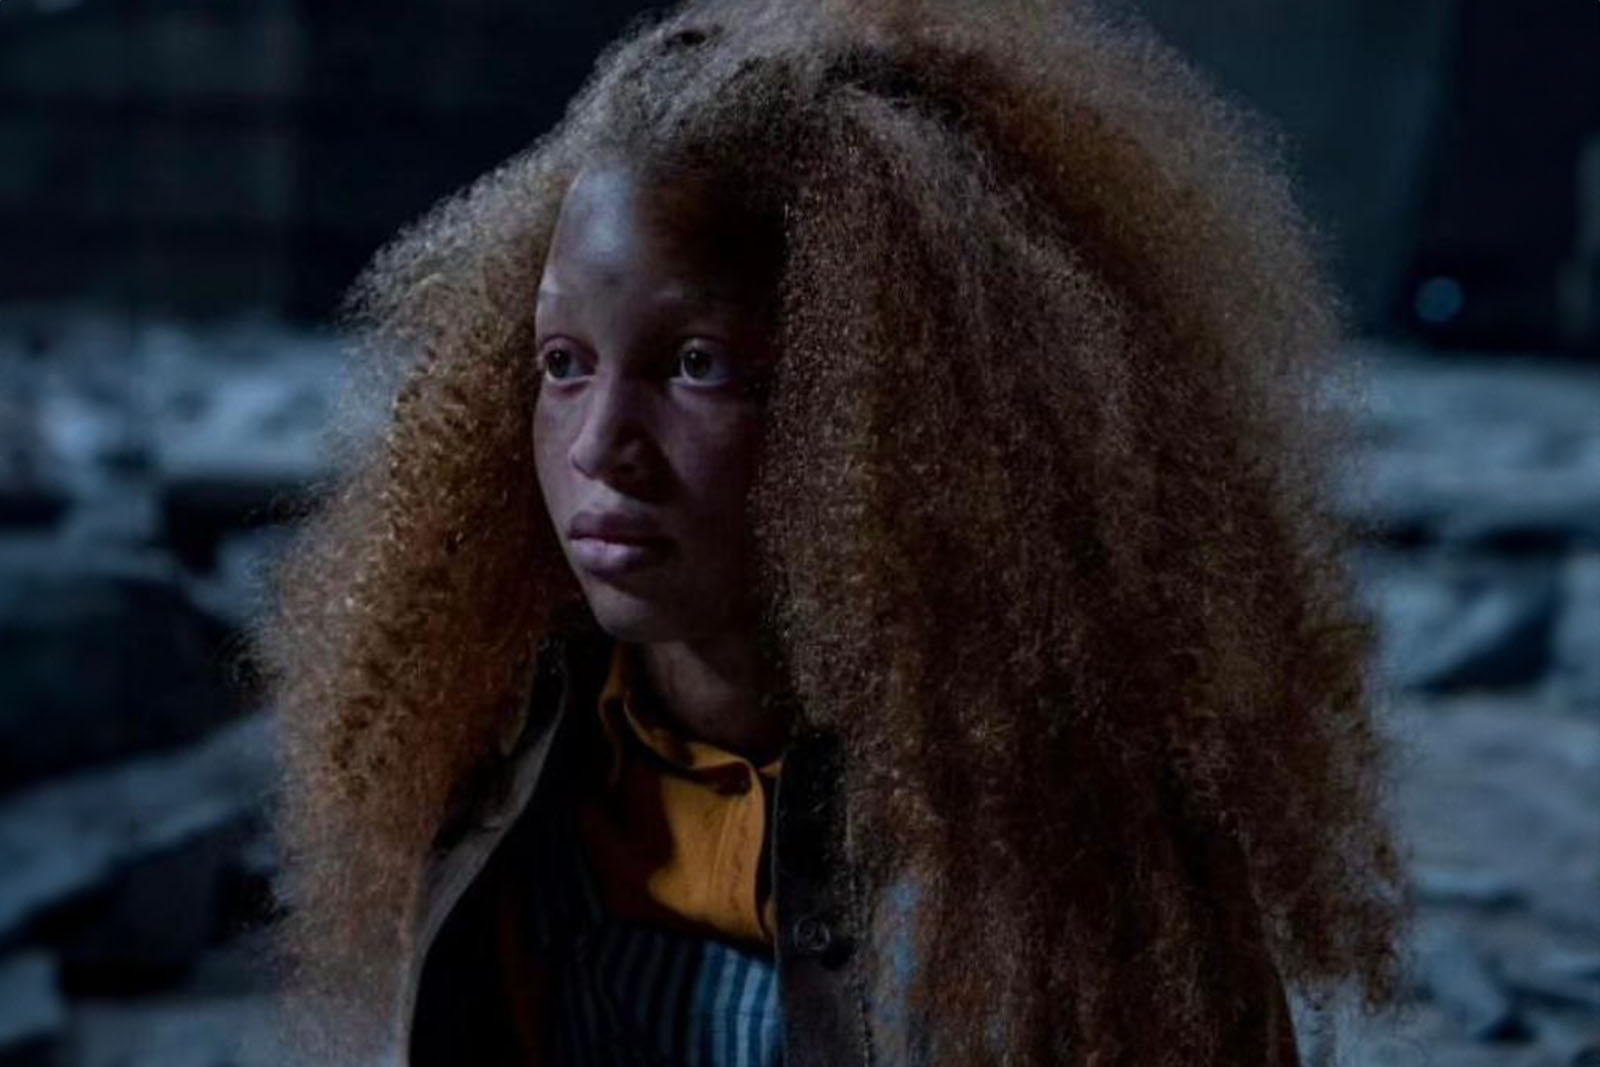 Luna Steeples plays Dill, the young female Tribute from District 11. Image © Lionsgate